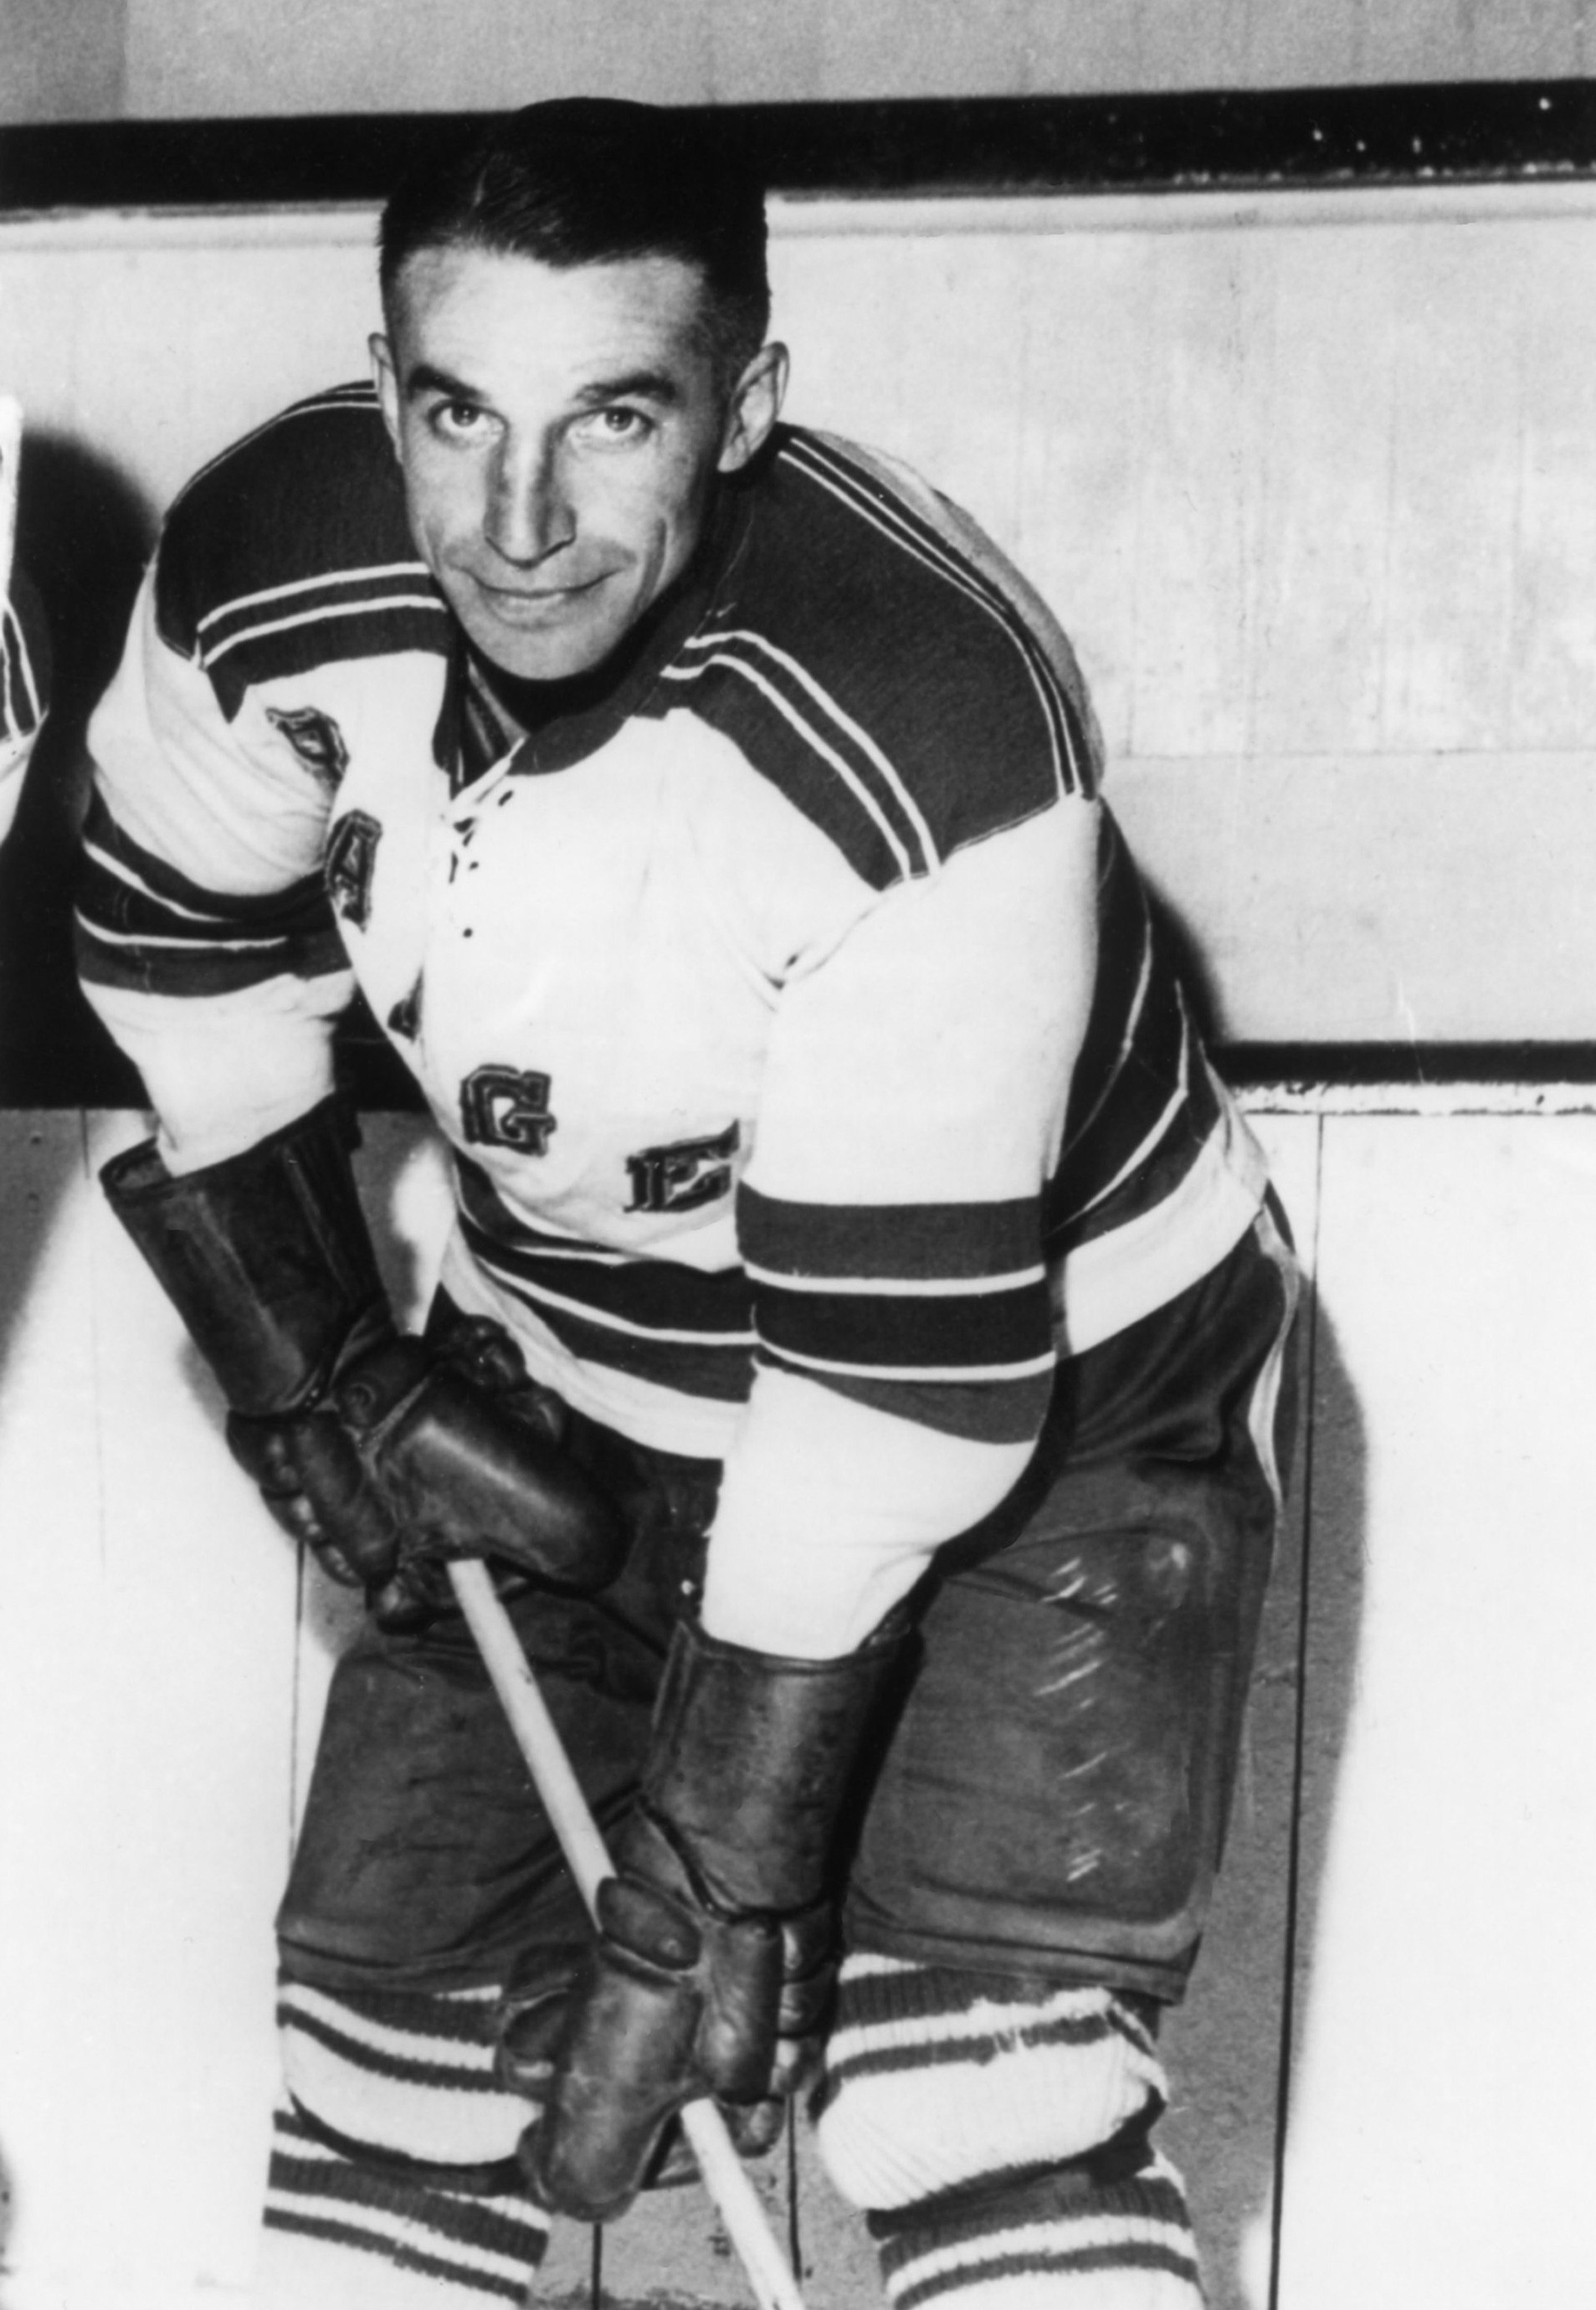 1954: Doug Bentley #14 of the New York Rangers poses for a portrait circa 1954. (Photo by B Bennett/Getty Images)